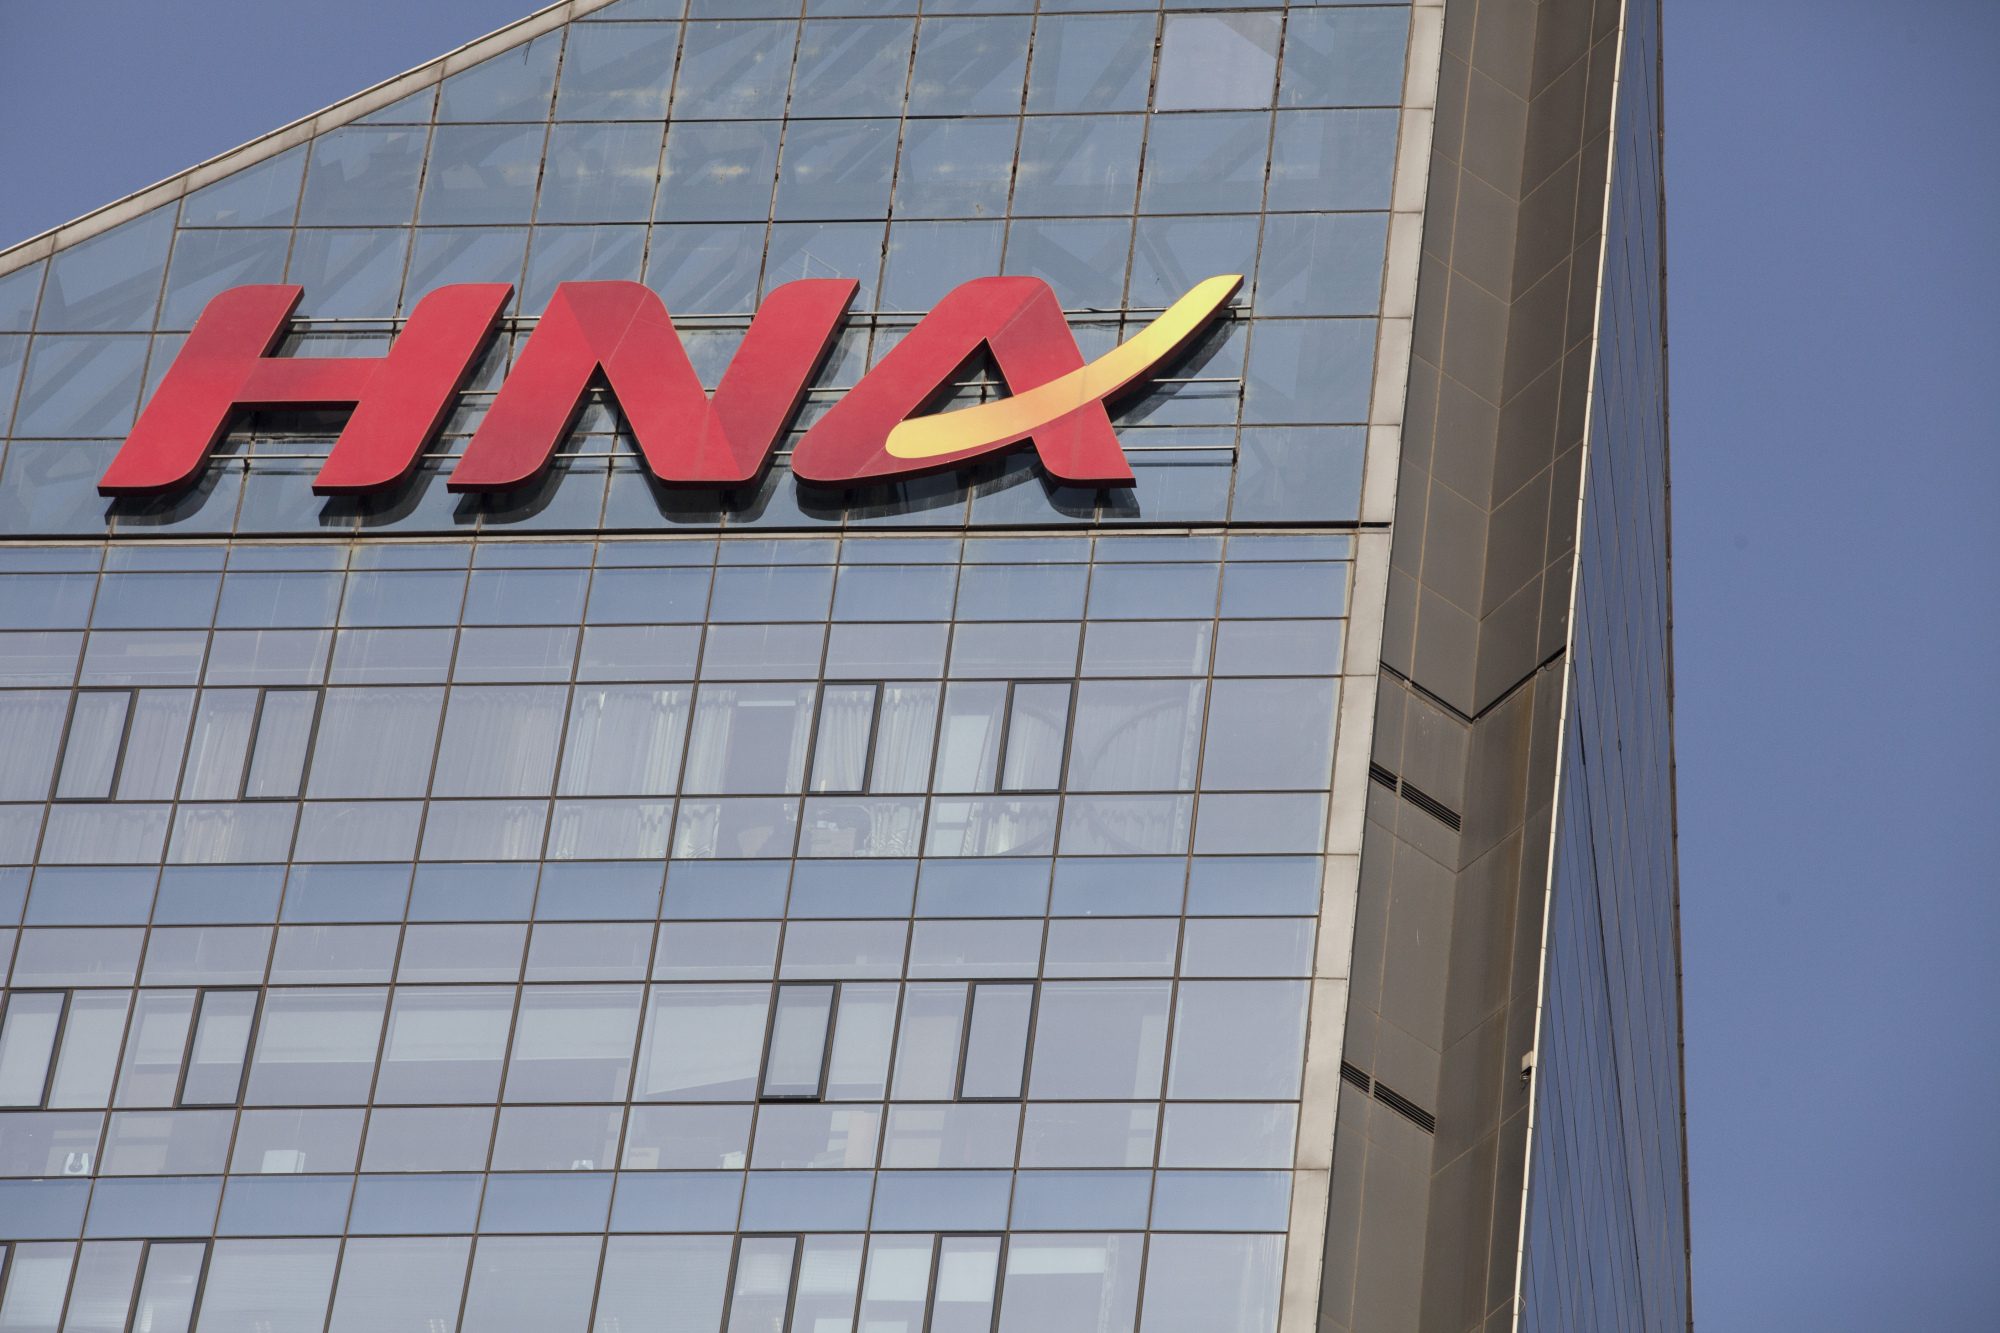 China's HNA Group restructuring plan approved by creditors